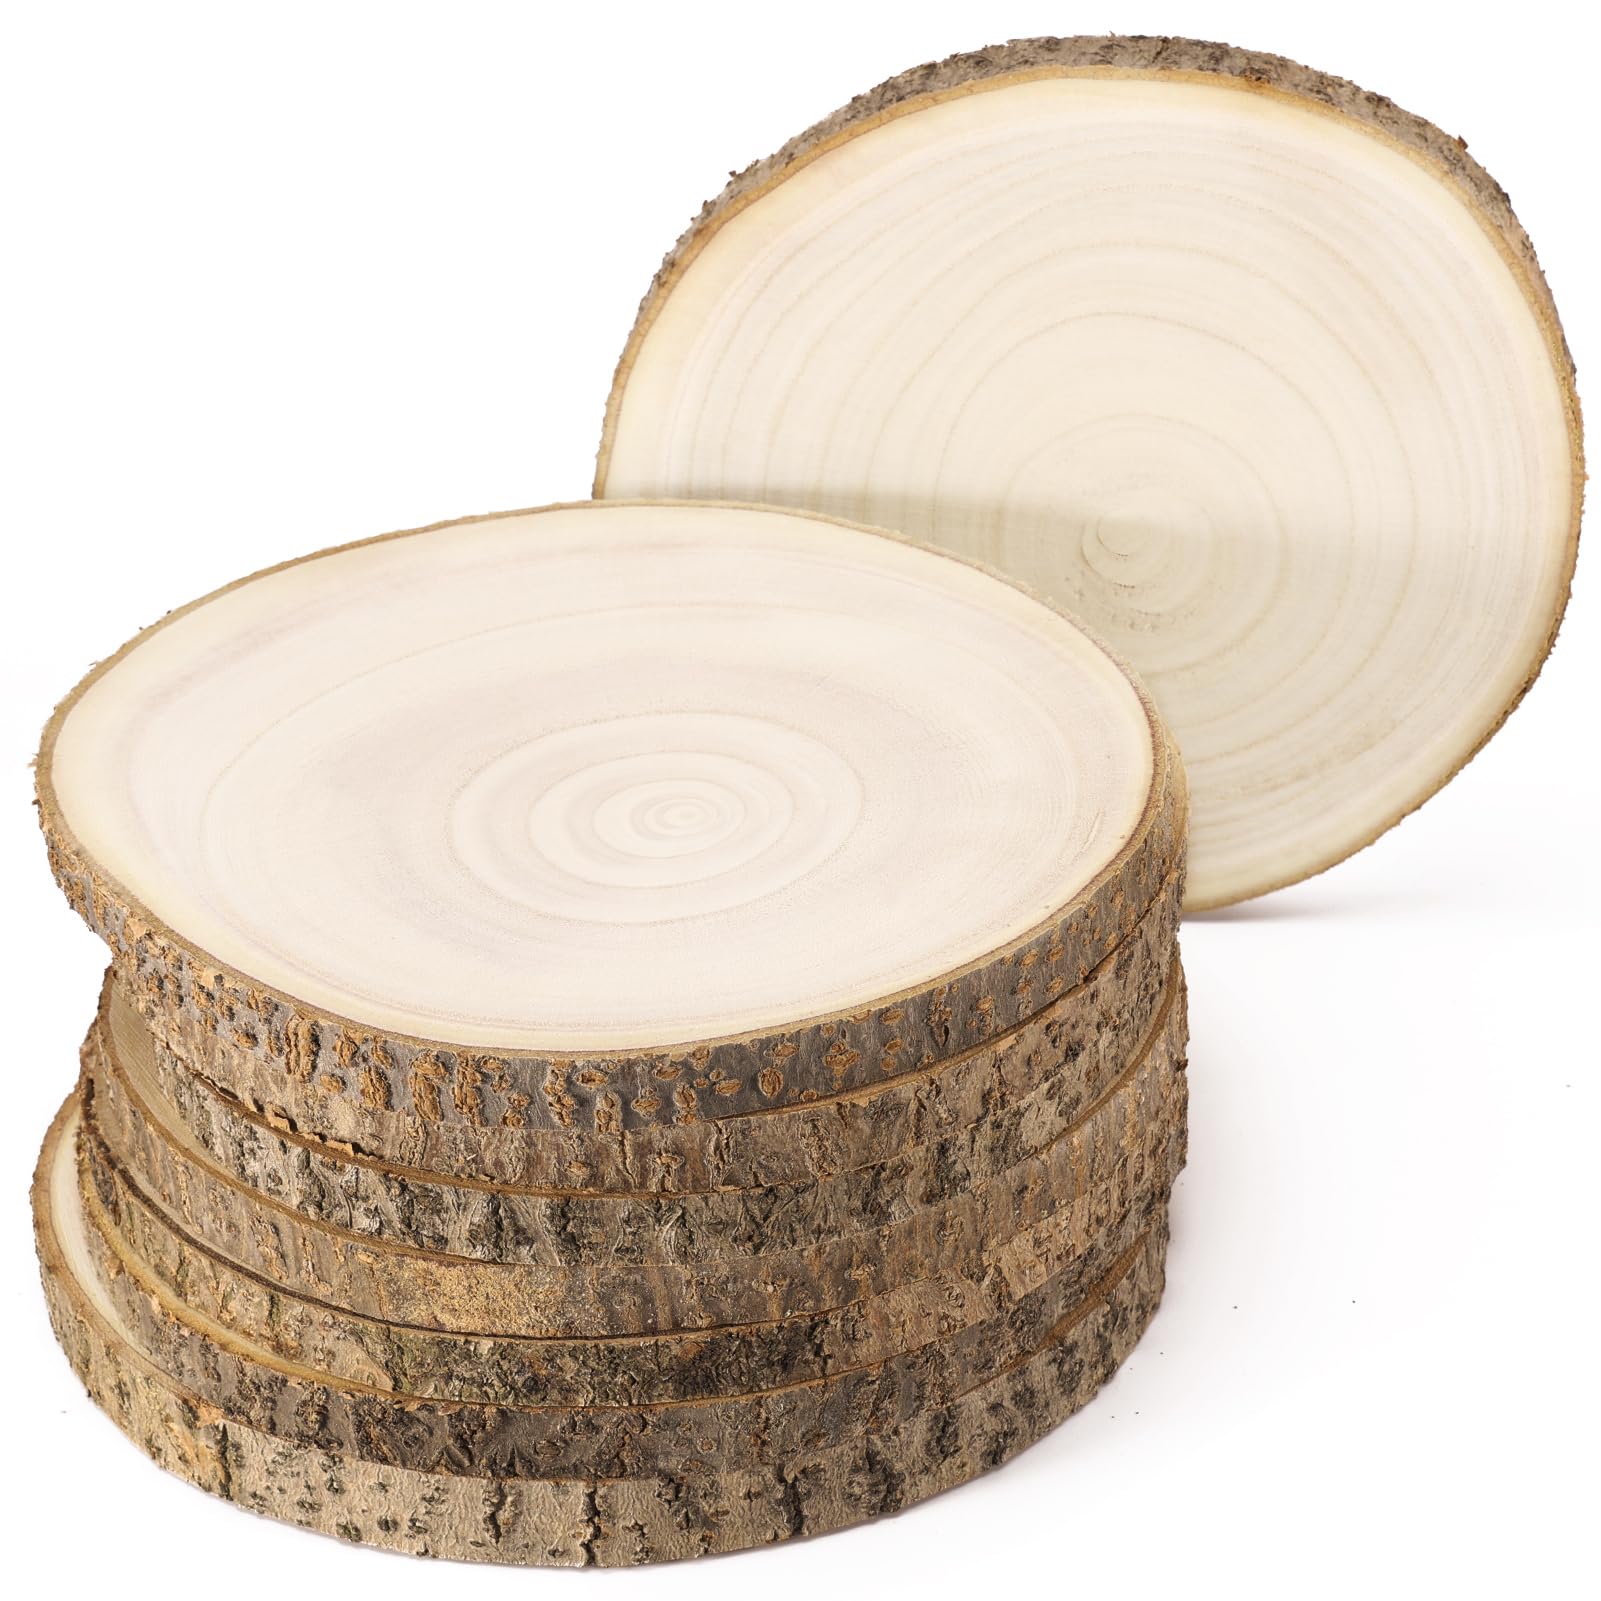 24 Pack 8 Inch Wooden Circles for Crafts 0.2 Thick Unfinished Round Wood  Slices Natural Rounds Wooden Cutouts Blank Round Wood Discs for DIY Crafts